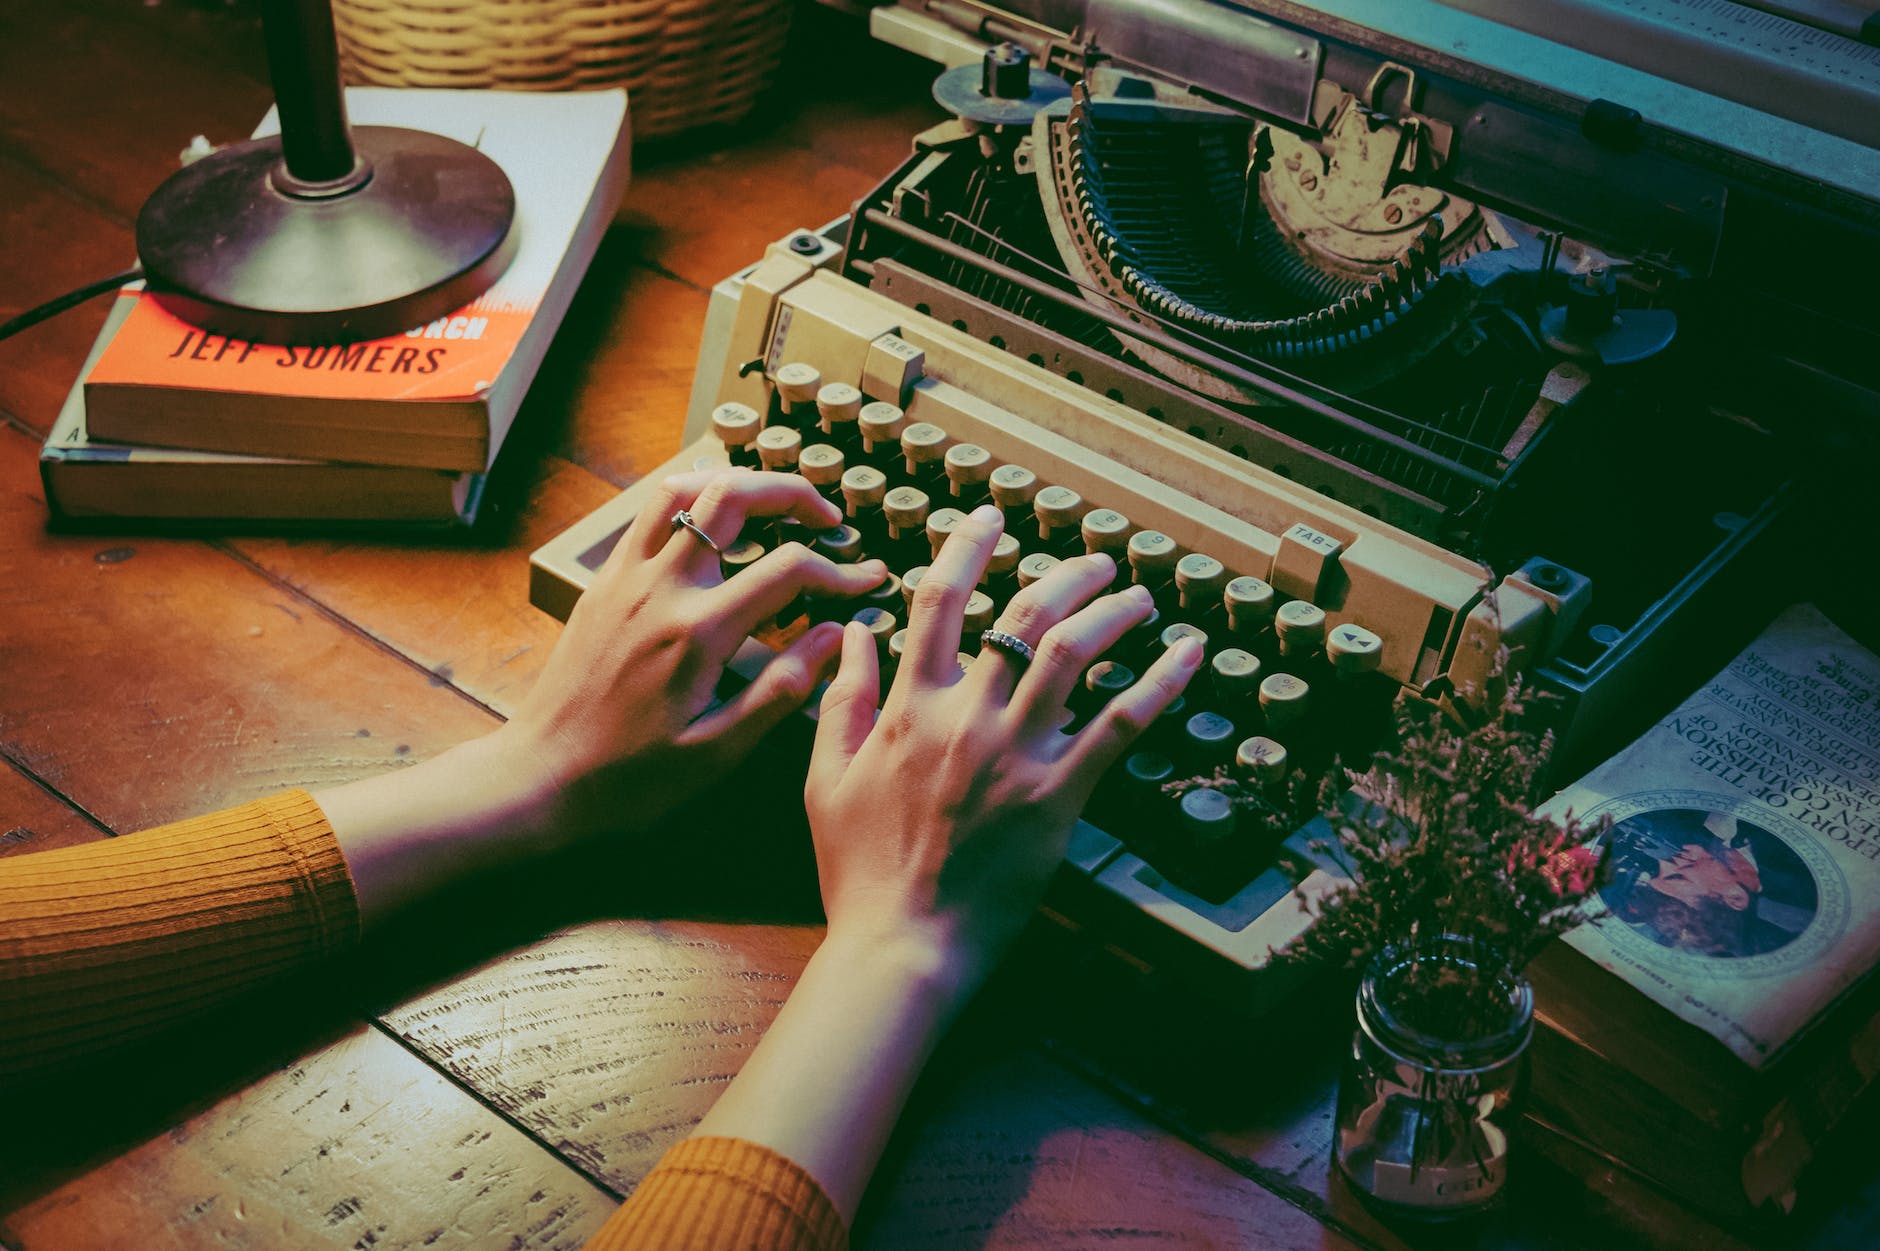 We can see a wooden desk and two hands (apparently, belonging to a woman who is notg visible in the picture) using a typewriter. There are some books on the table and flowers in a glass of water.